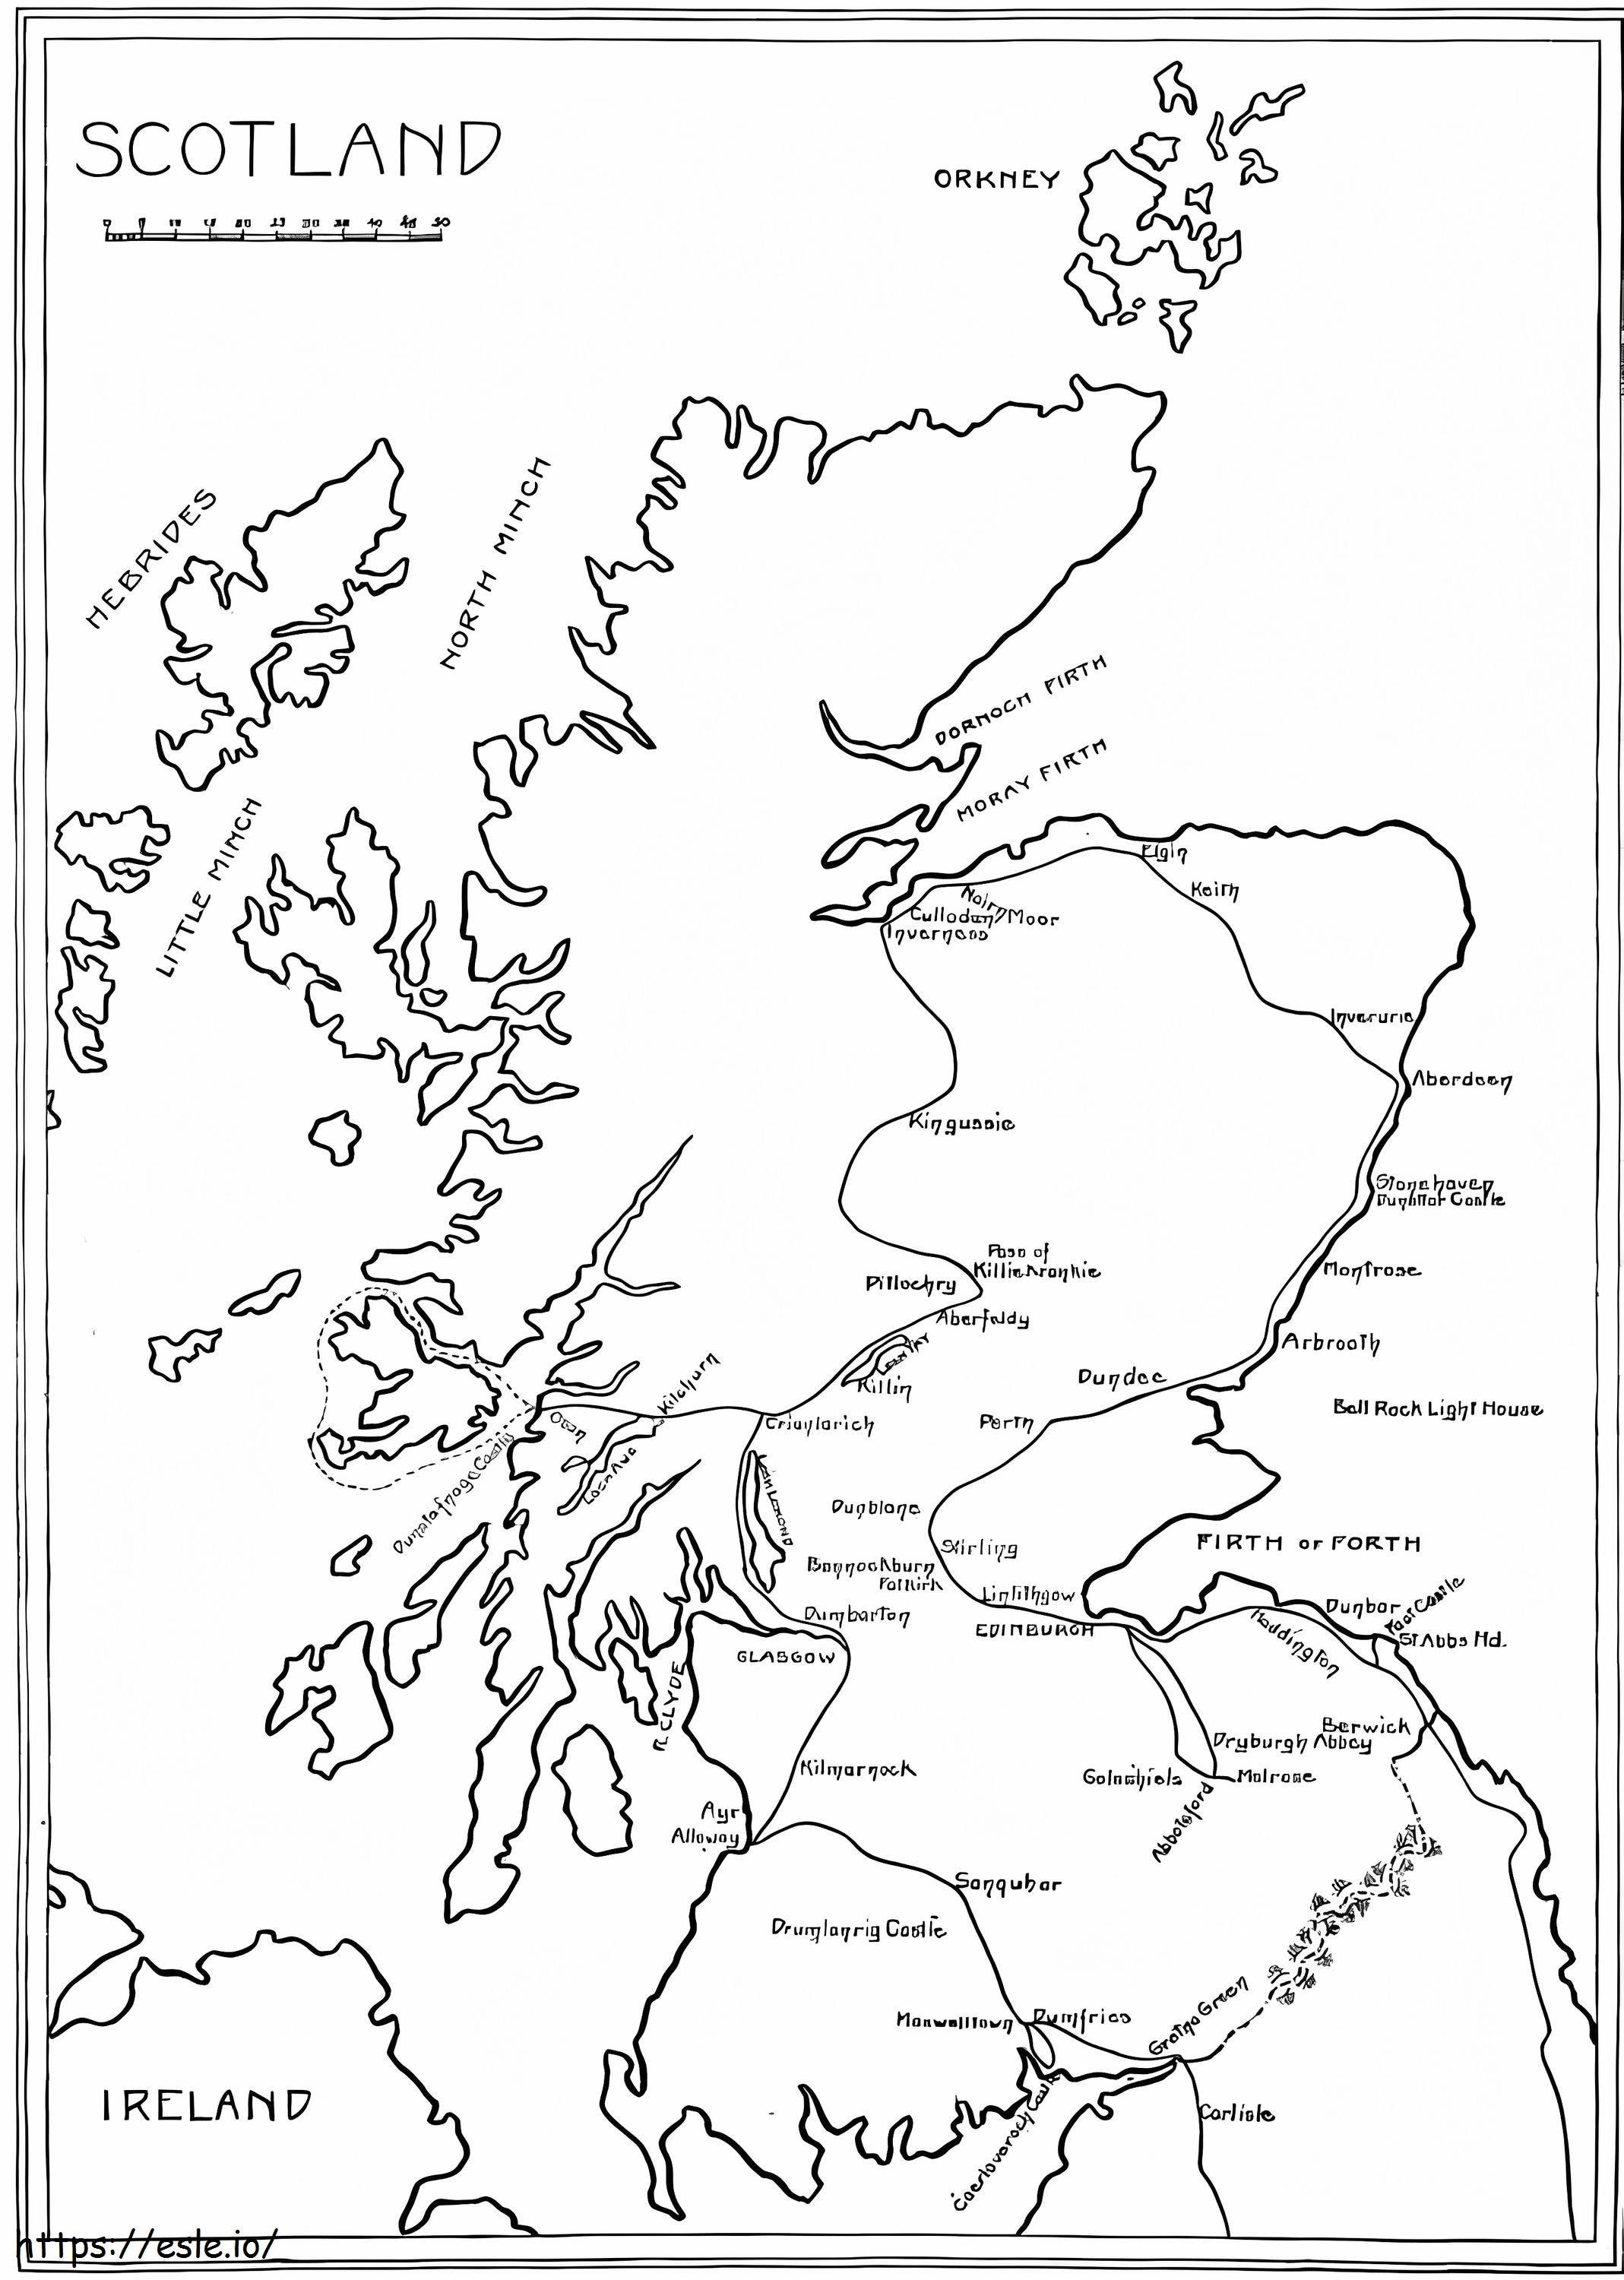 Scotland Map coloring page